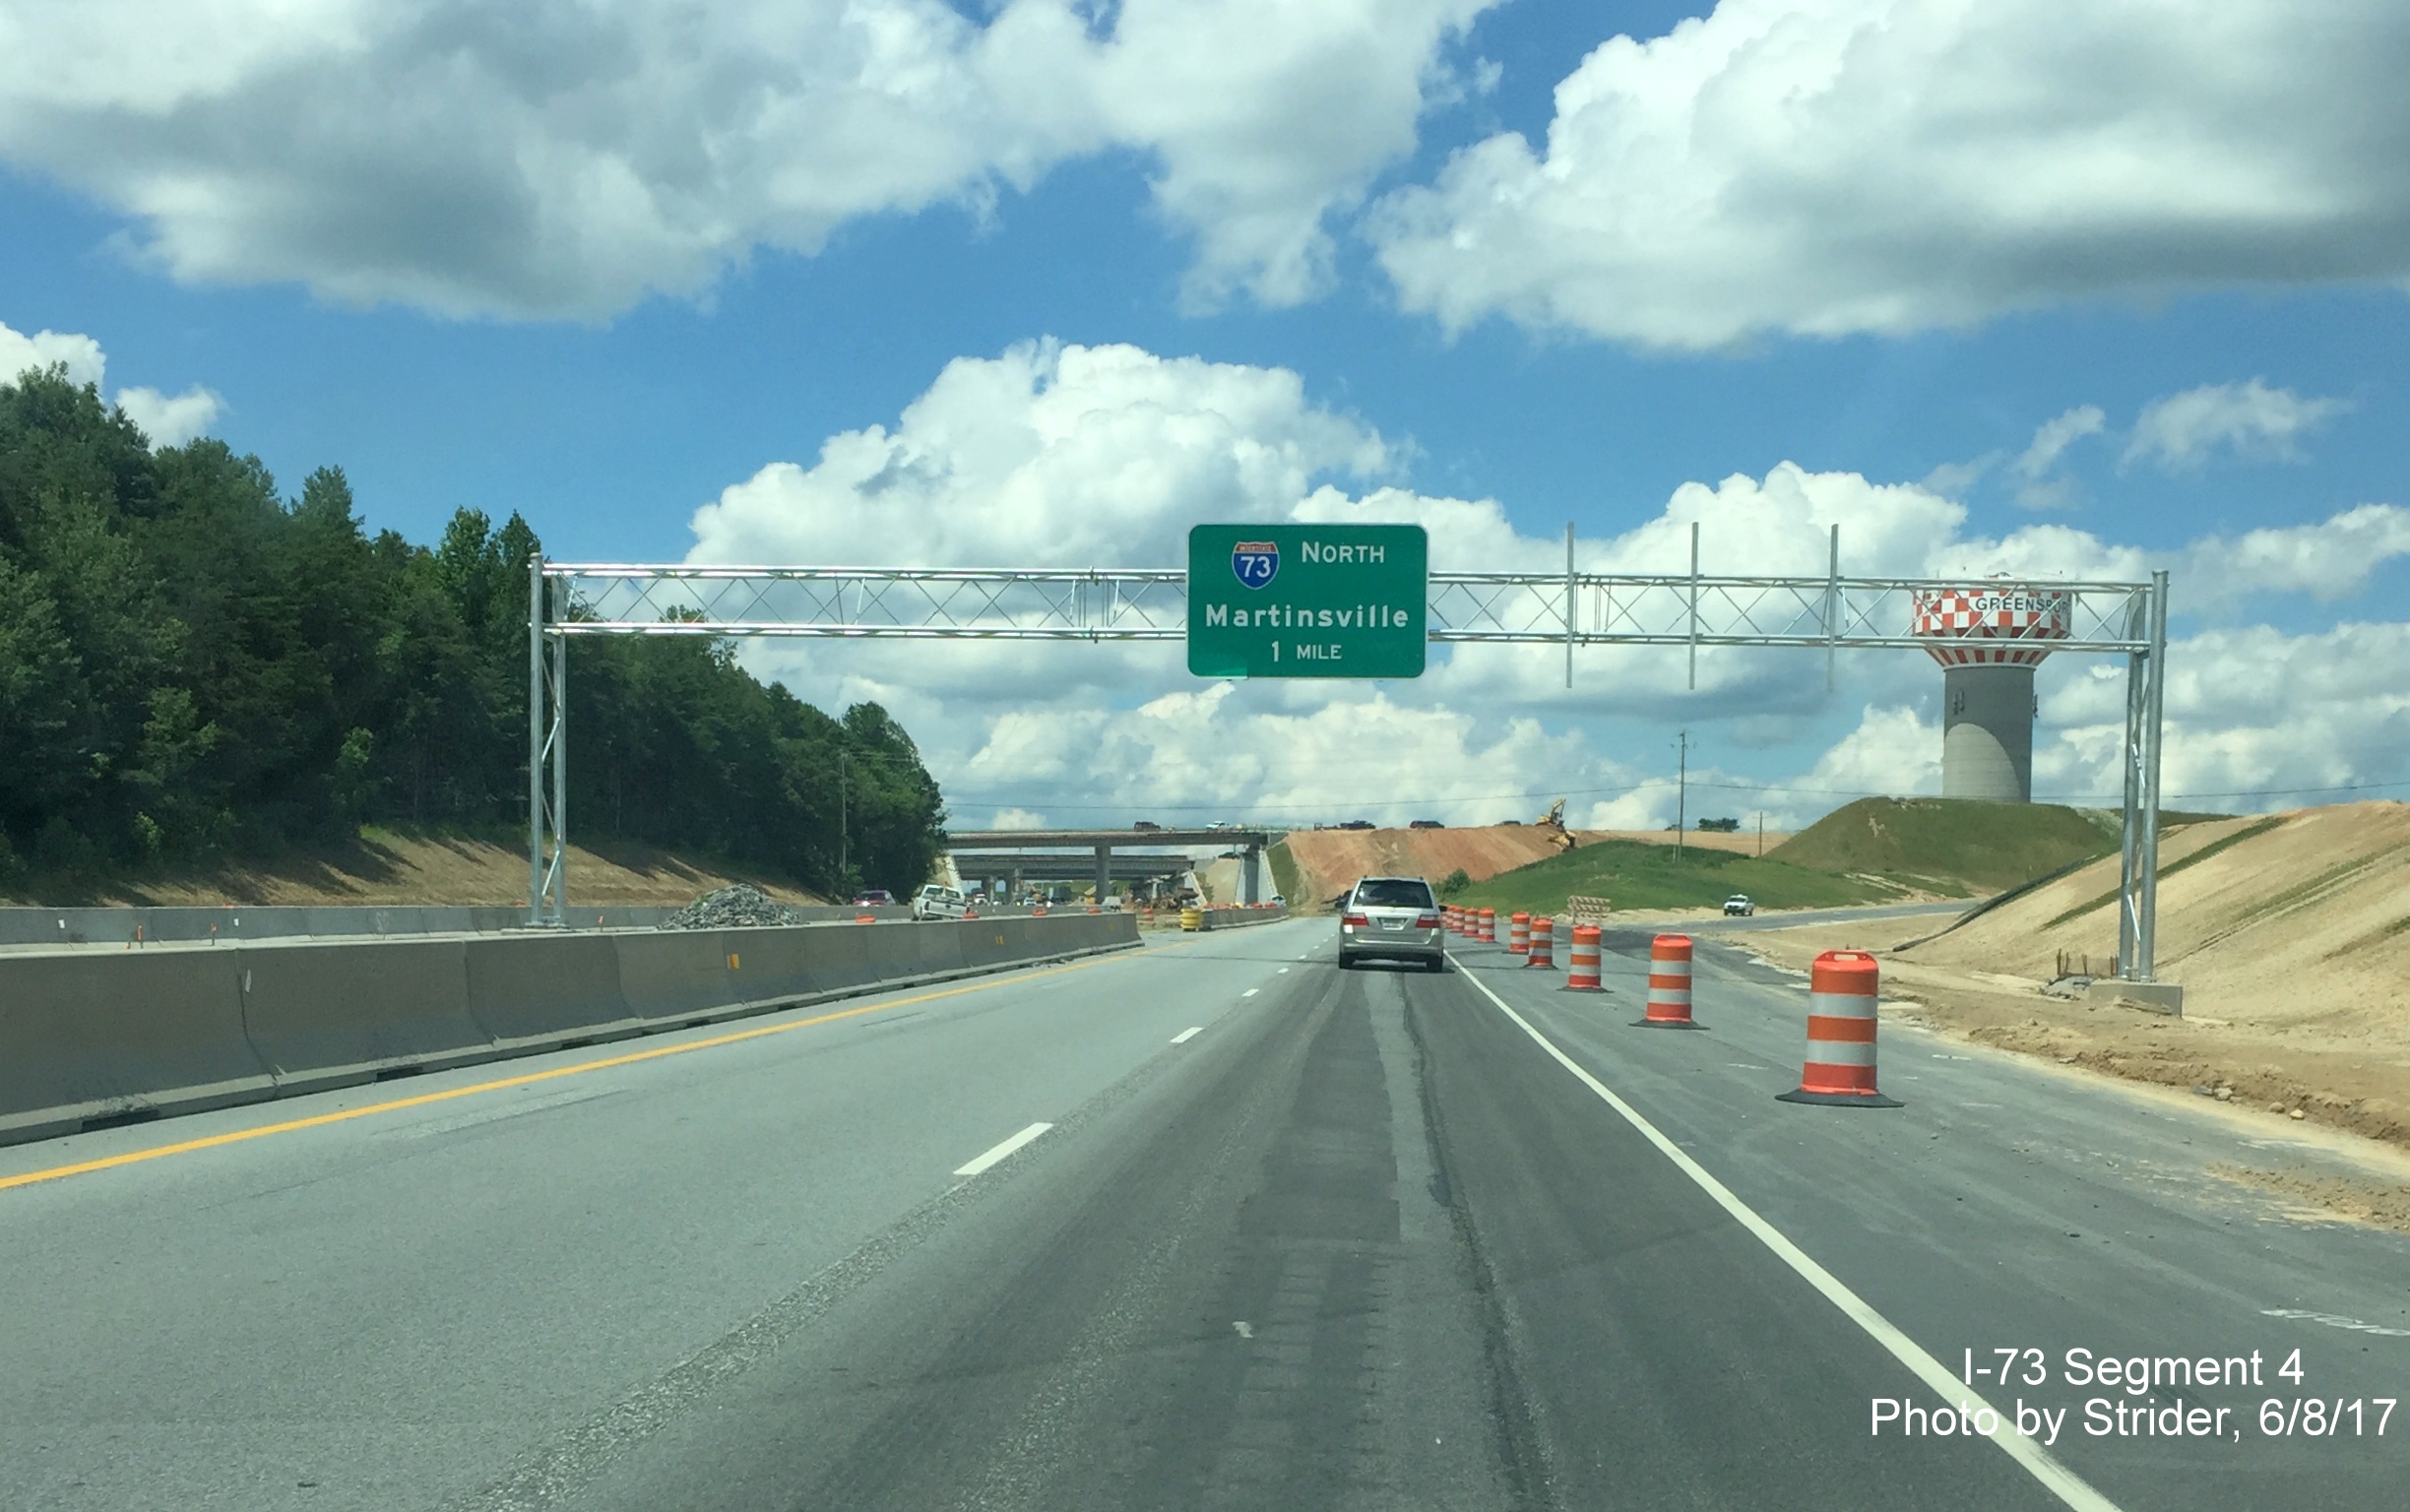 Image taken of overhead signs for I-73 interchanges with NC 68 near PTI Airport in Greensboro, from Strider